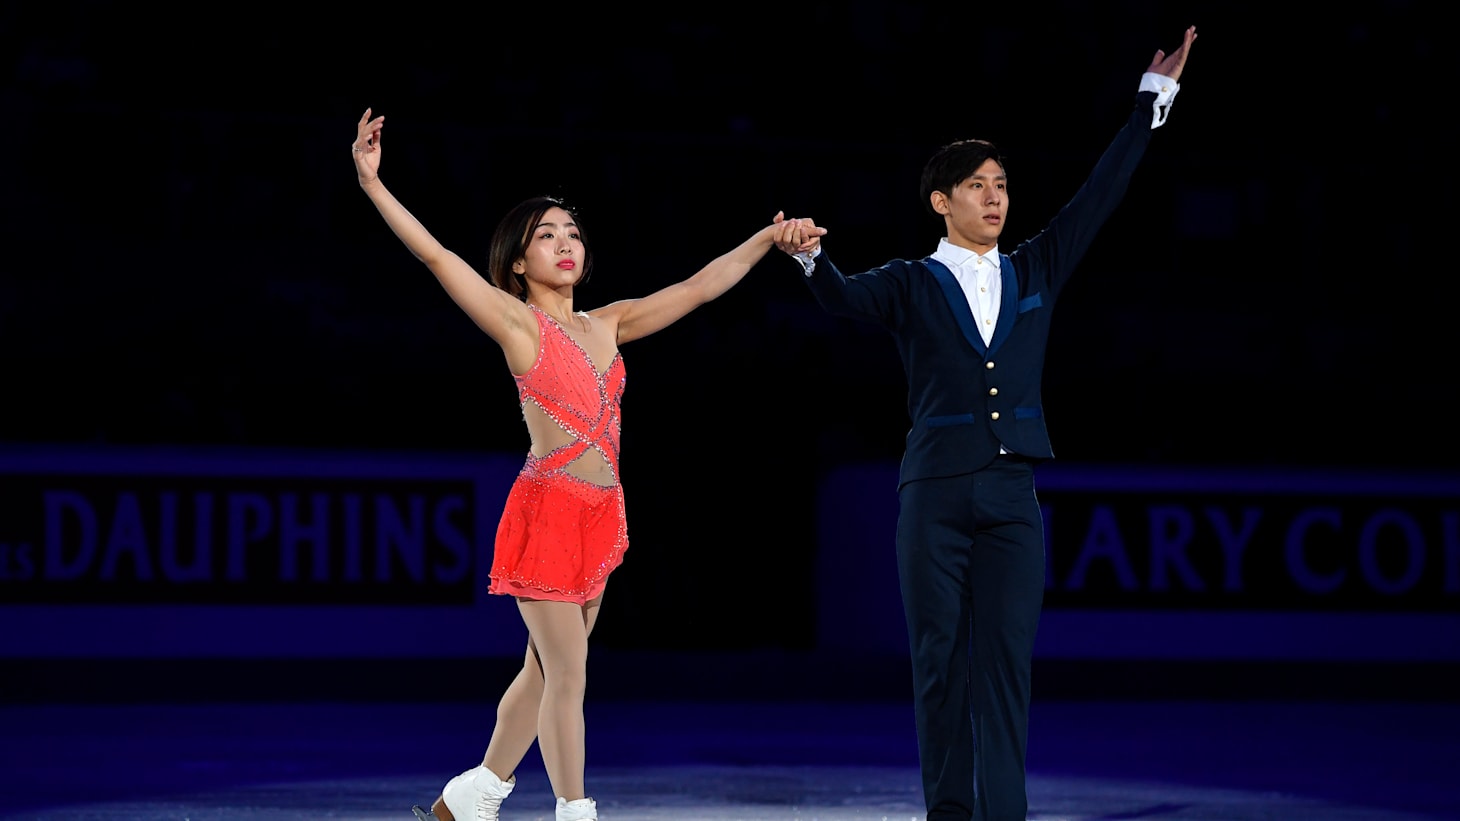 How to watch figure skating at Beijing 2022 Tips, athletes and schedule